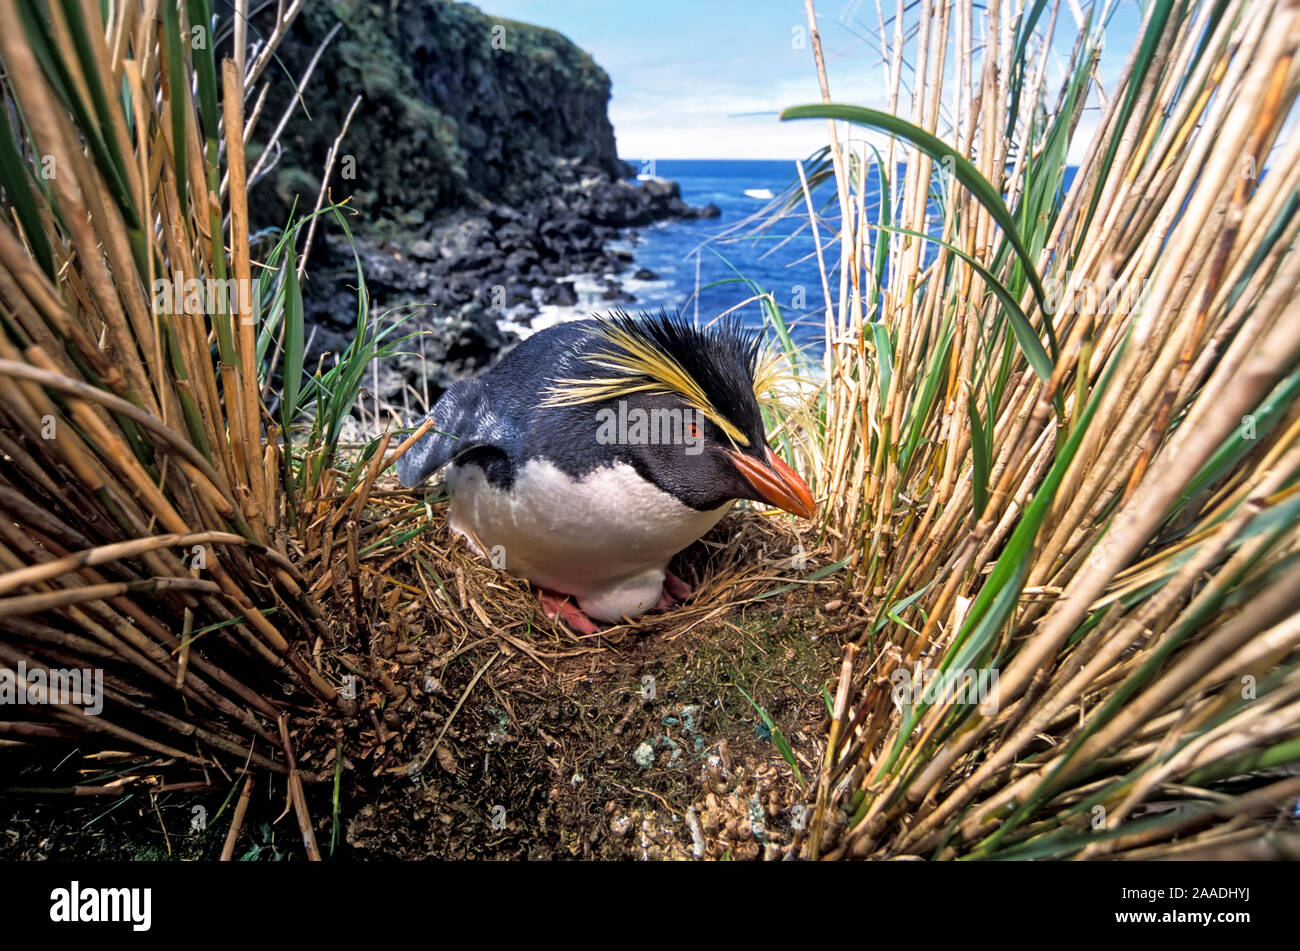 Northern Rockhopper Penguin (Eudyptes moseleyi) on nest, Gough Island, Gough and Inaccessible Islands UNESCO World Heritage Site, South Atlantic. Stock Photo